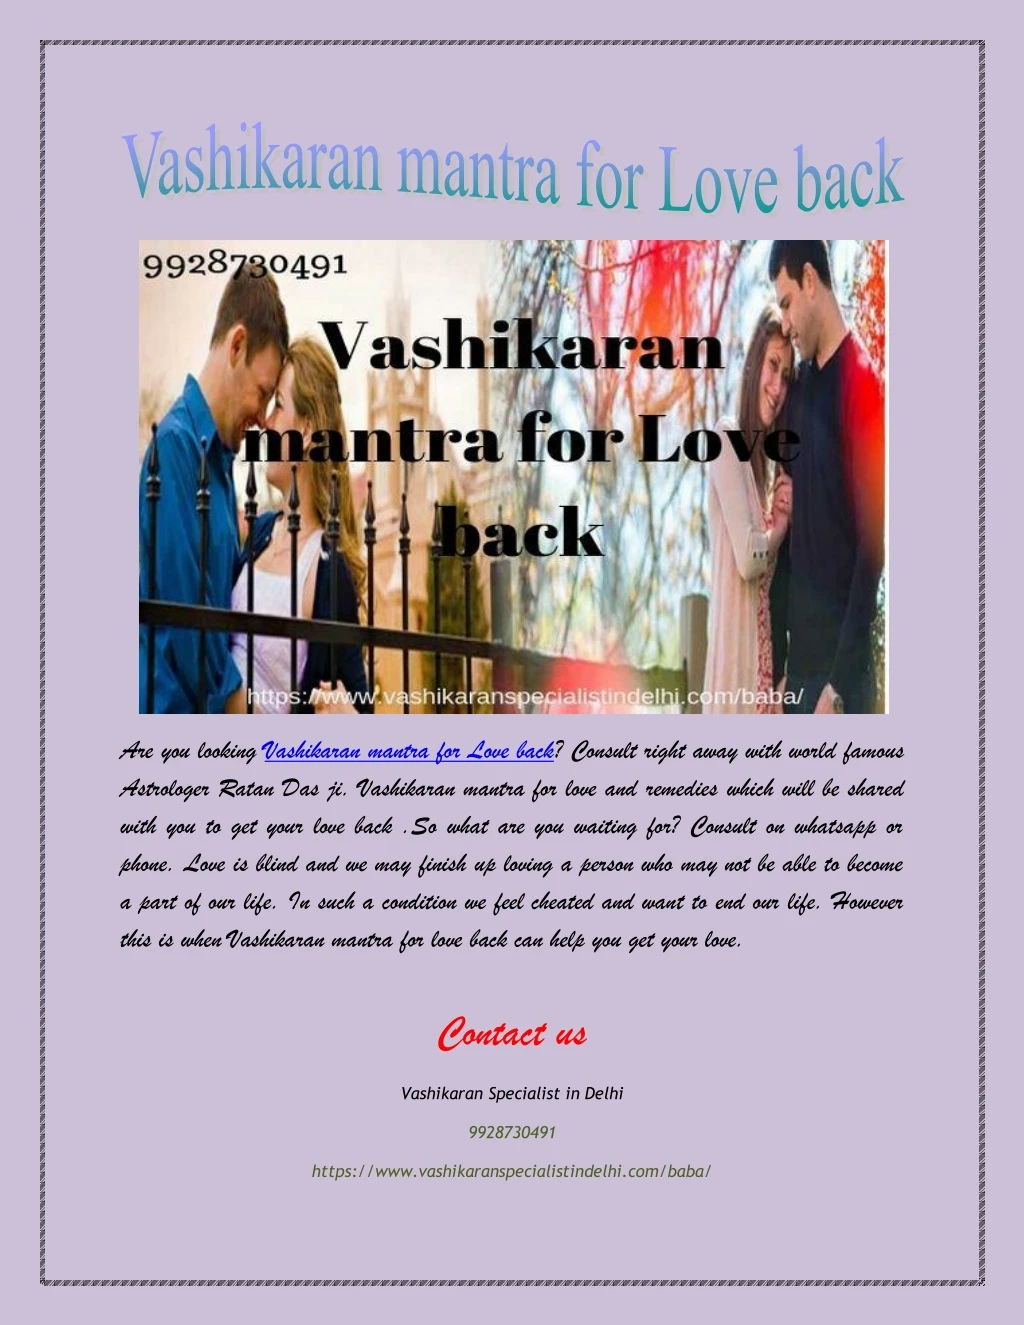 are you looking vashikaran mantra for love back